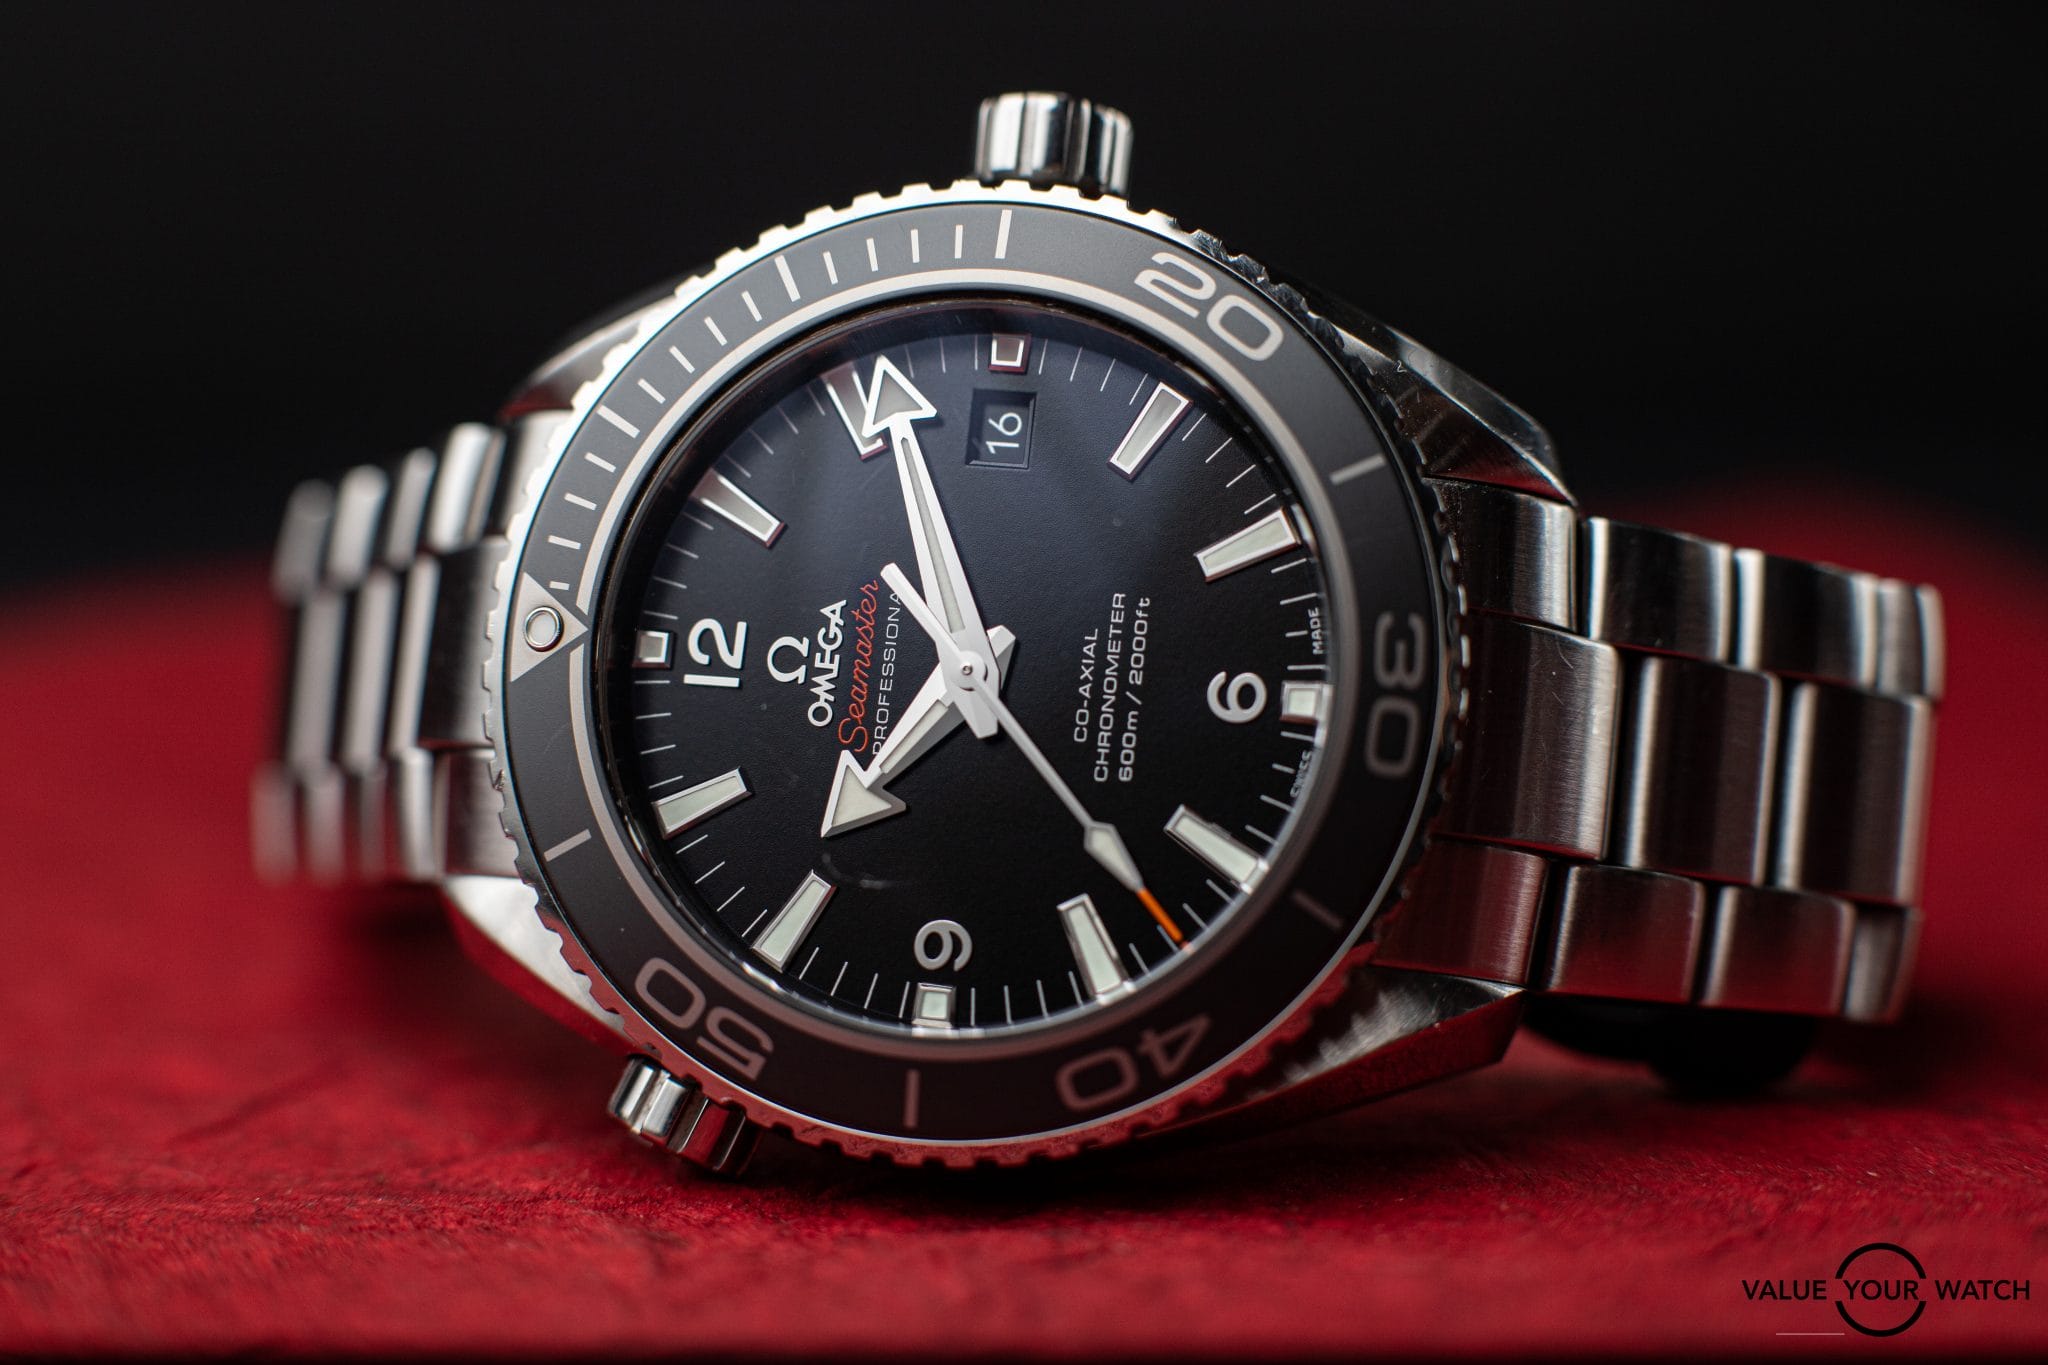 How To Maximize The Benefit Of Value Your Watch Marketplace!